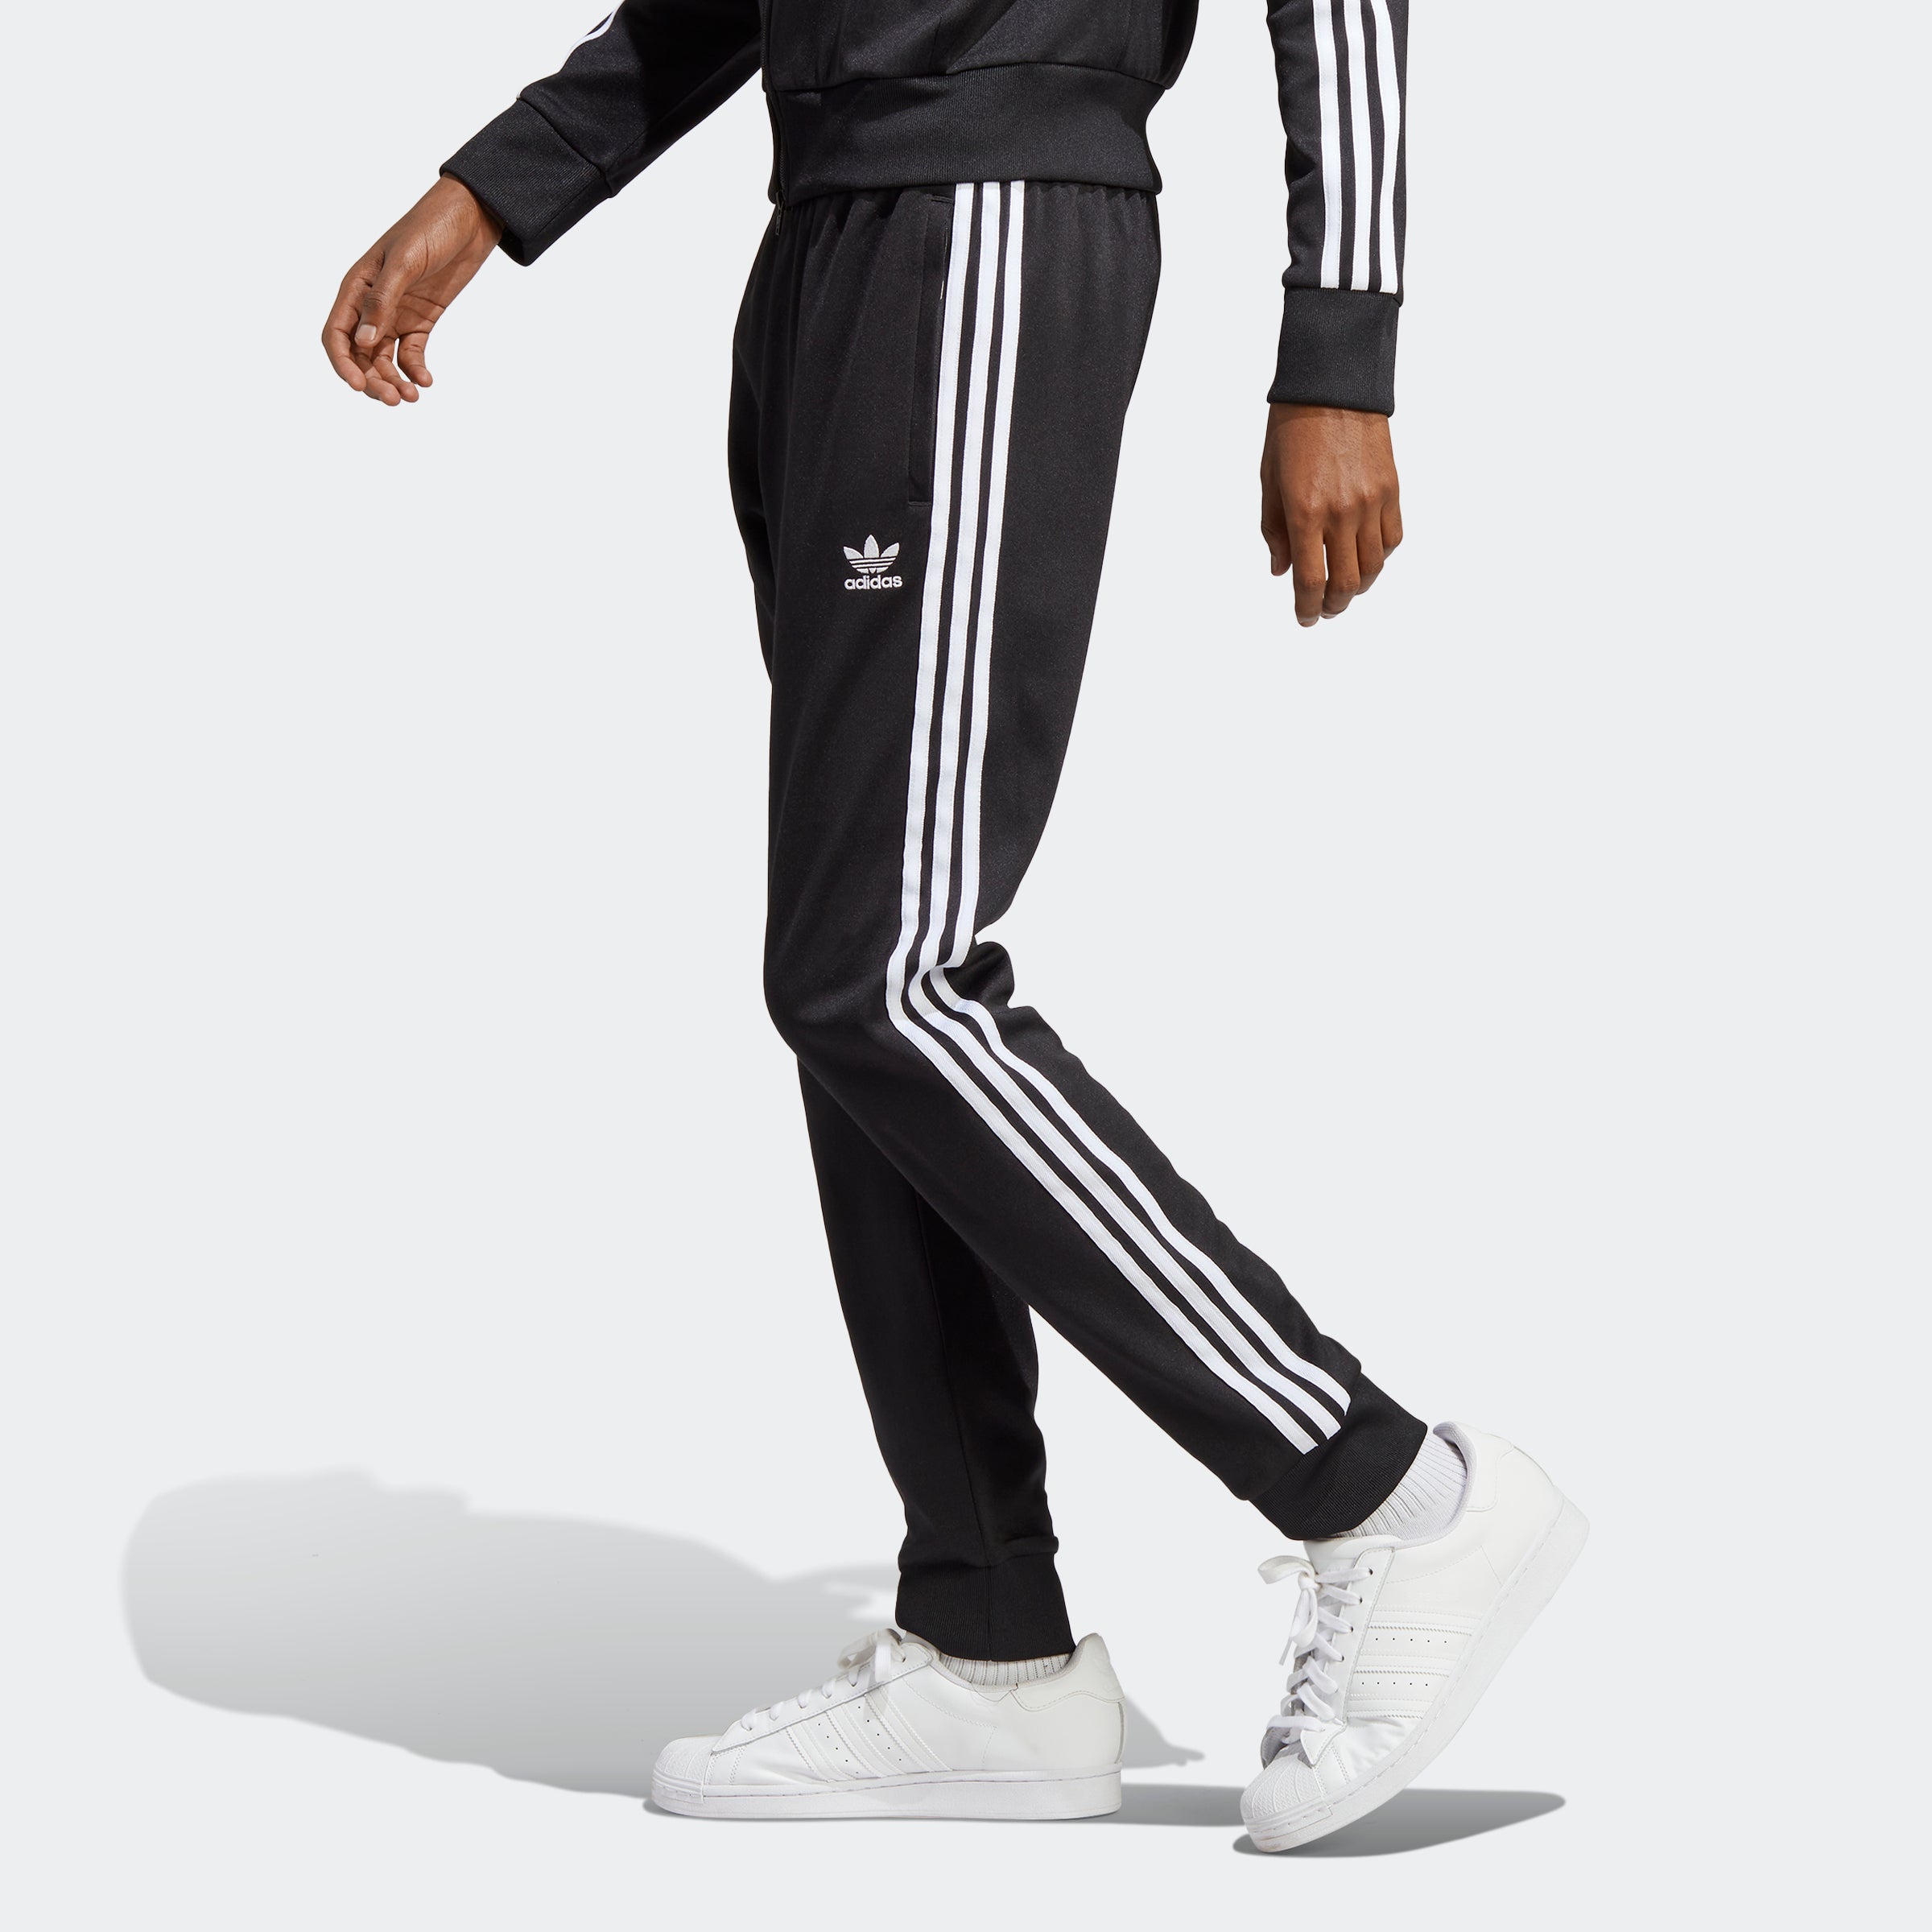 Tall Gym Pants: Grey Stripe Pant For Tall Men | American Tall